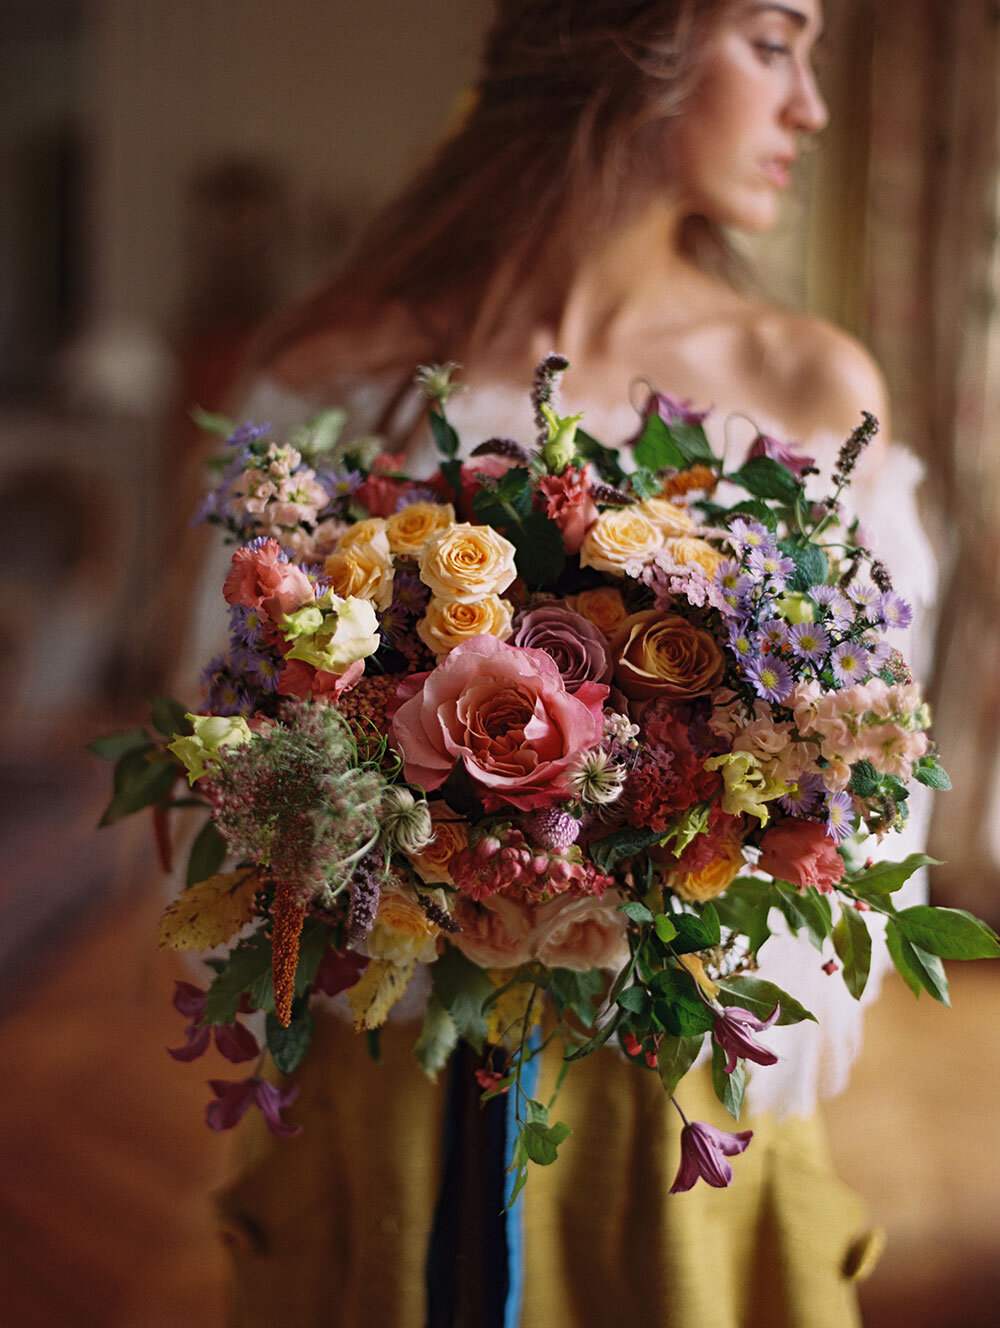 A woman holding a bouquet of flowers in a chateau wedding venue.